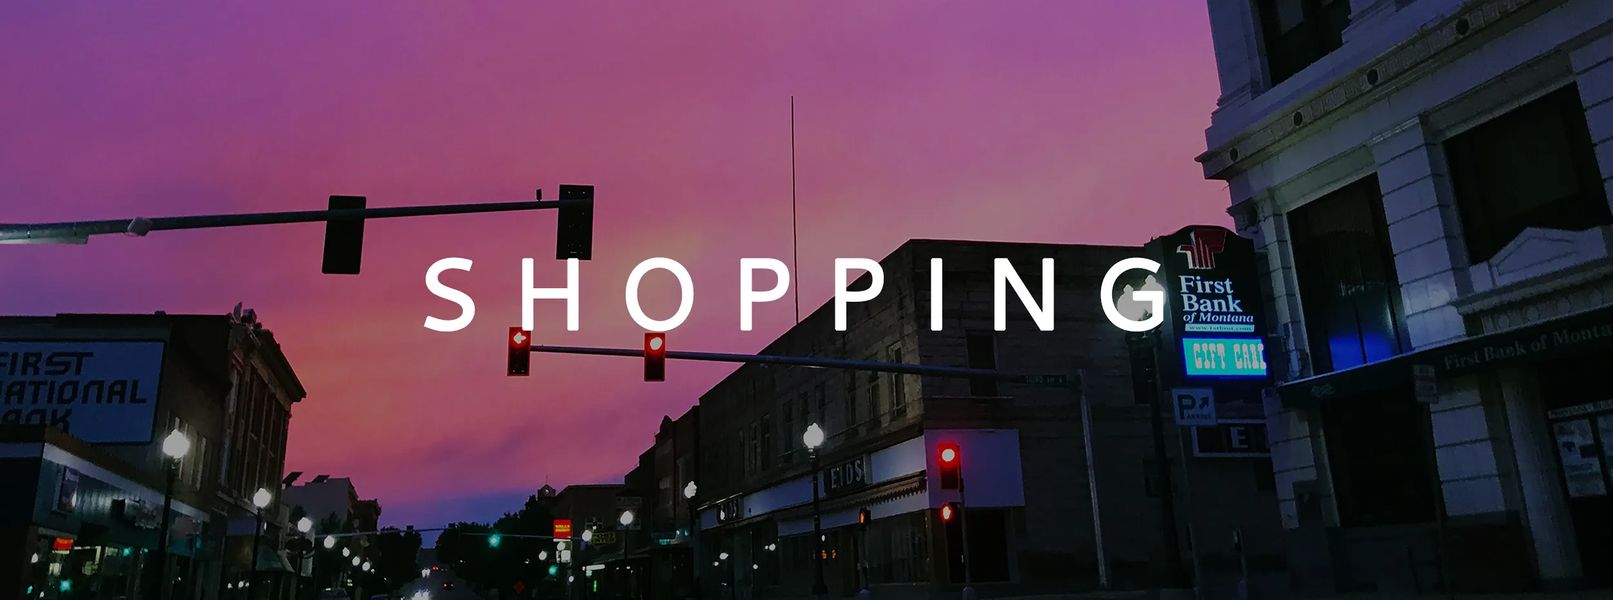 Shopping options in Lewistown and Central Montana 